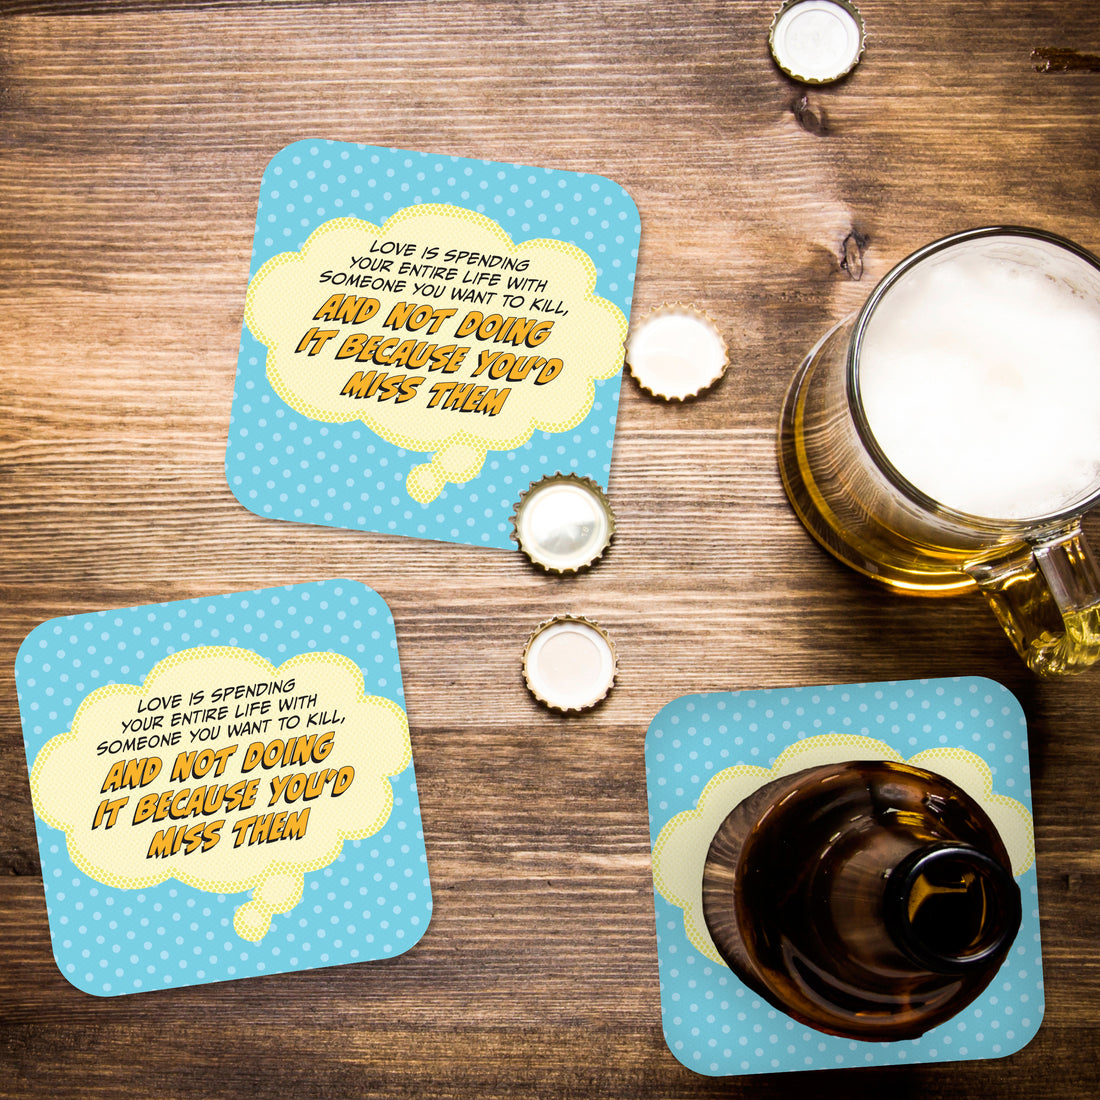 Love is Spending Your Entire Life With Someone... Paper Coaster Set